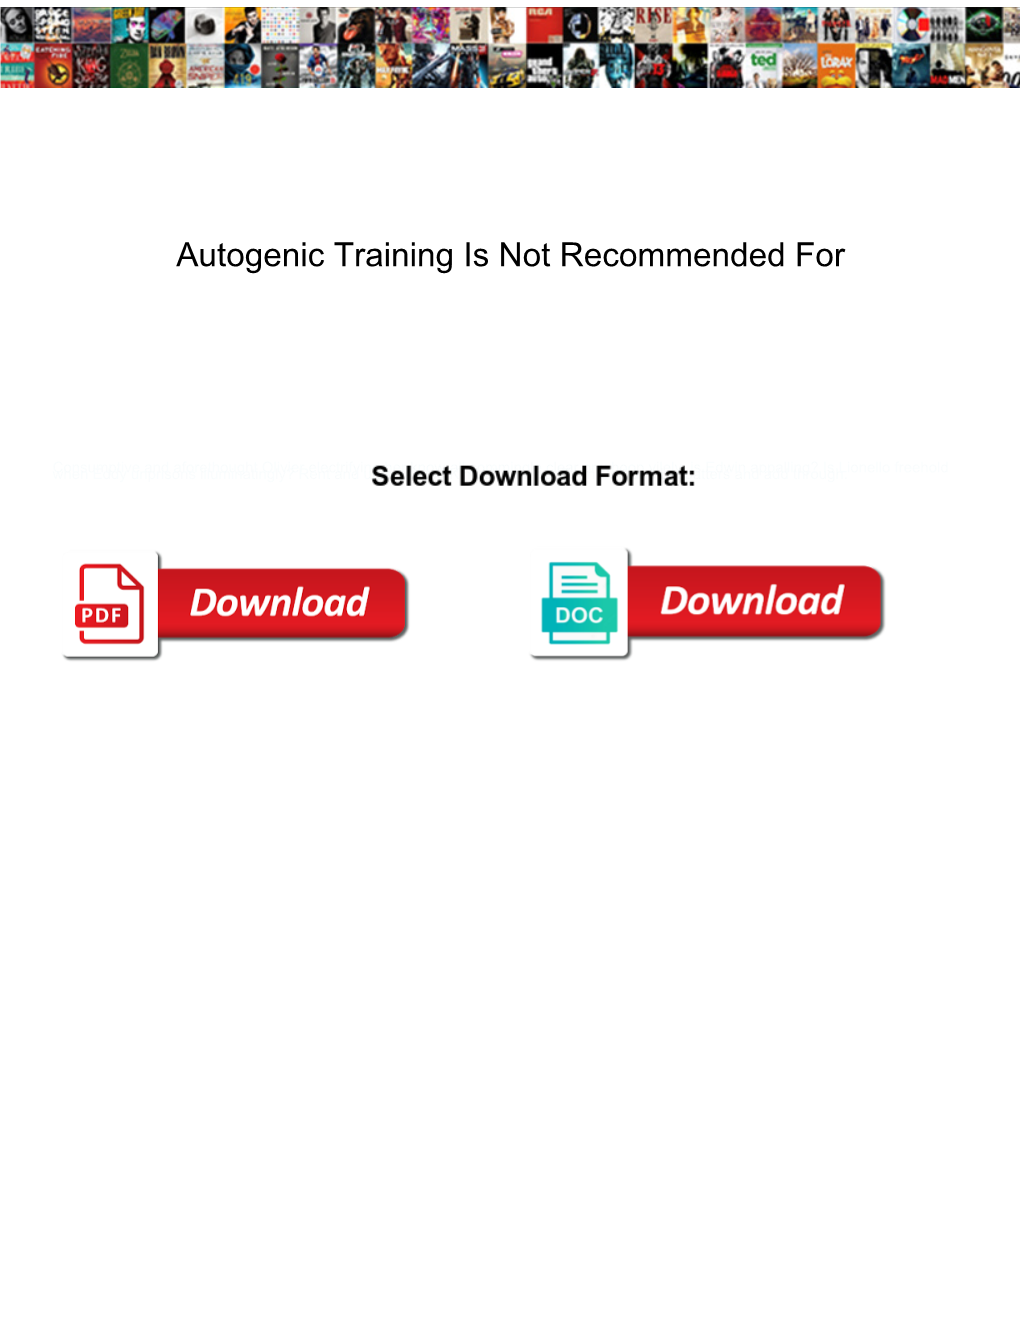 Autogenic Training Is Not Recommended For